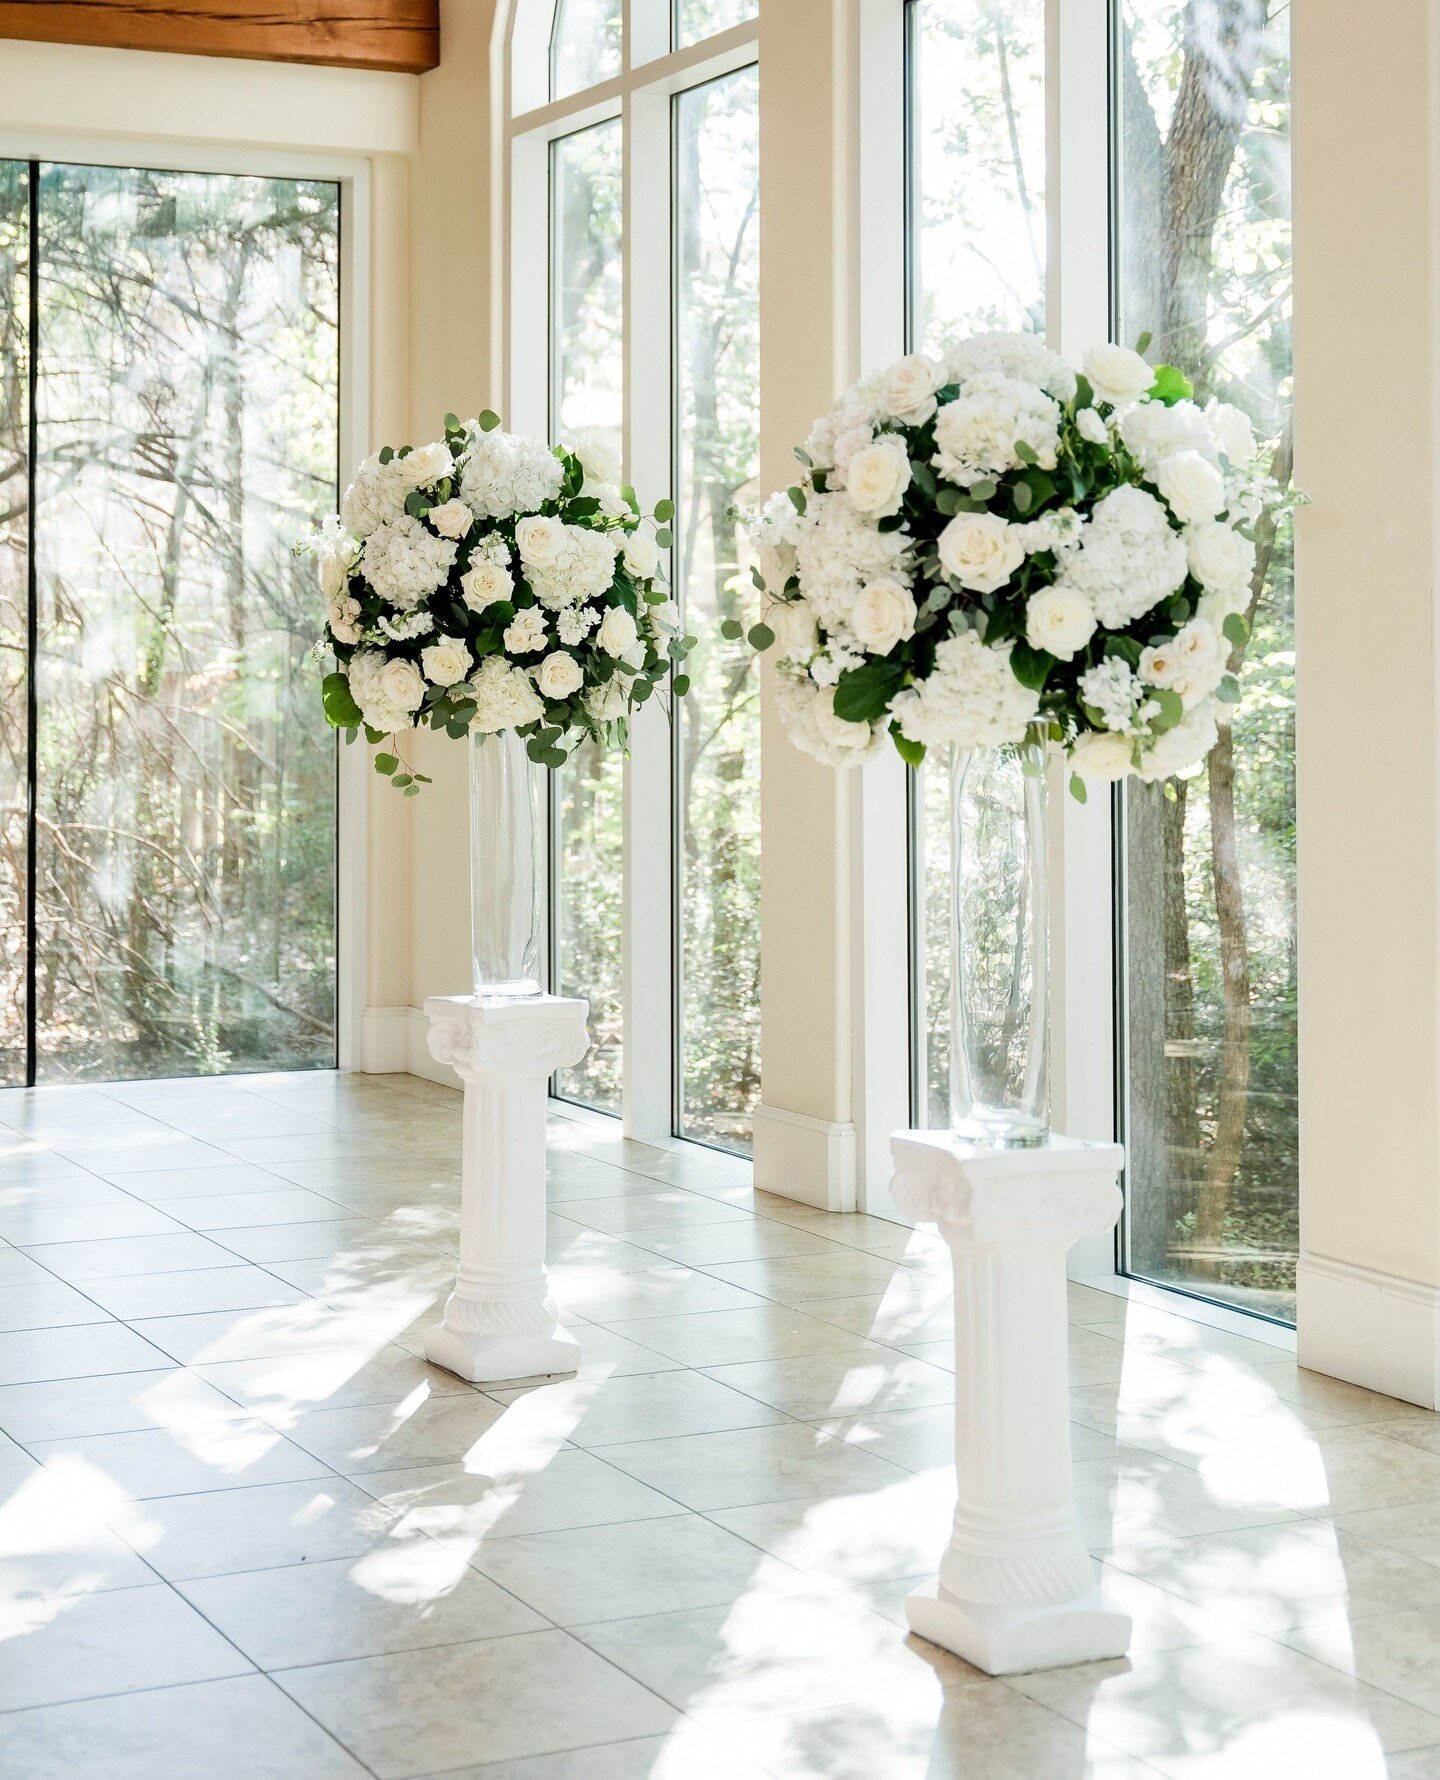 Enhance your ceremony ambiance with our thoughtfully curated arrangements. ⁠
⁠
Meticulously designed to complement your venue, these arrangements seamlessly integrate floral elegance into your special moments. ⁠
⁠
Venue @ashtongardensdallas⁠
Photogra